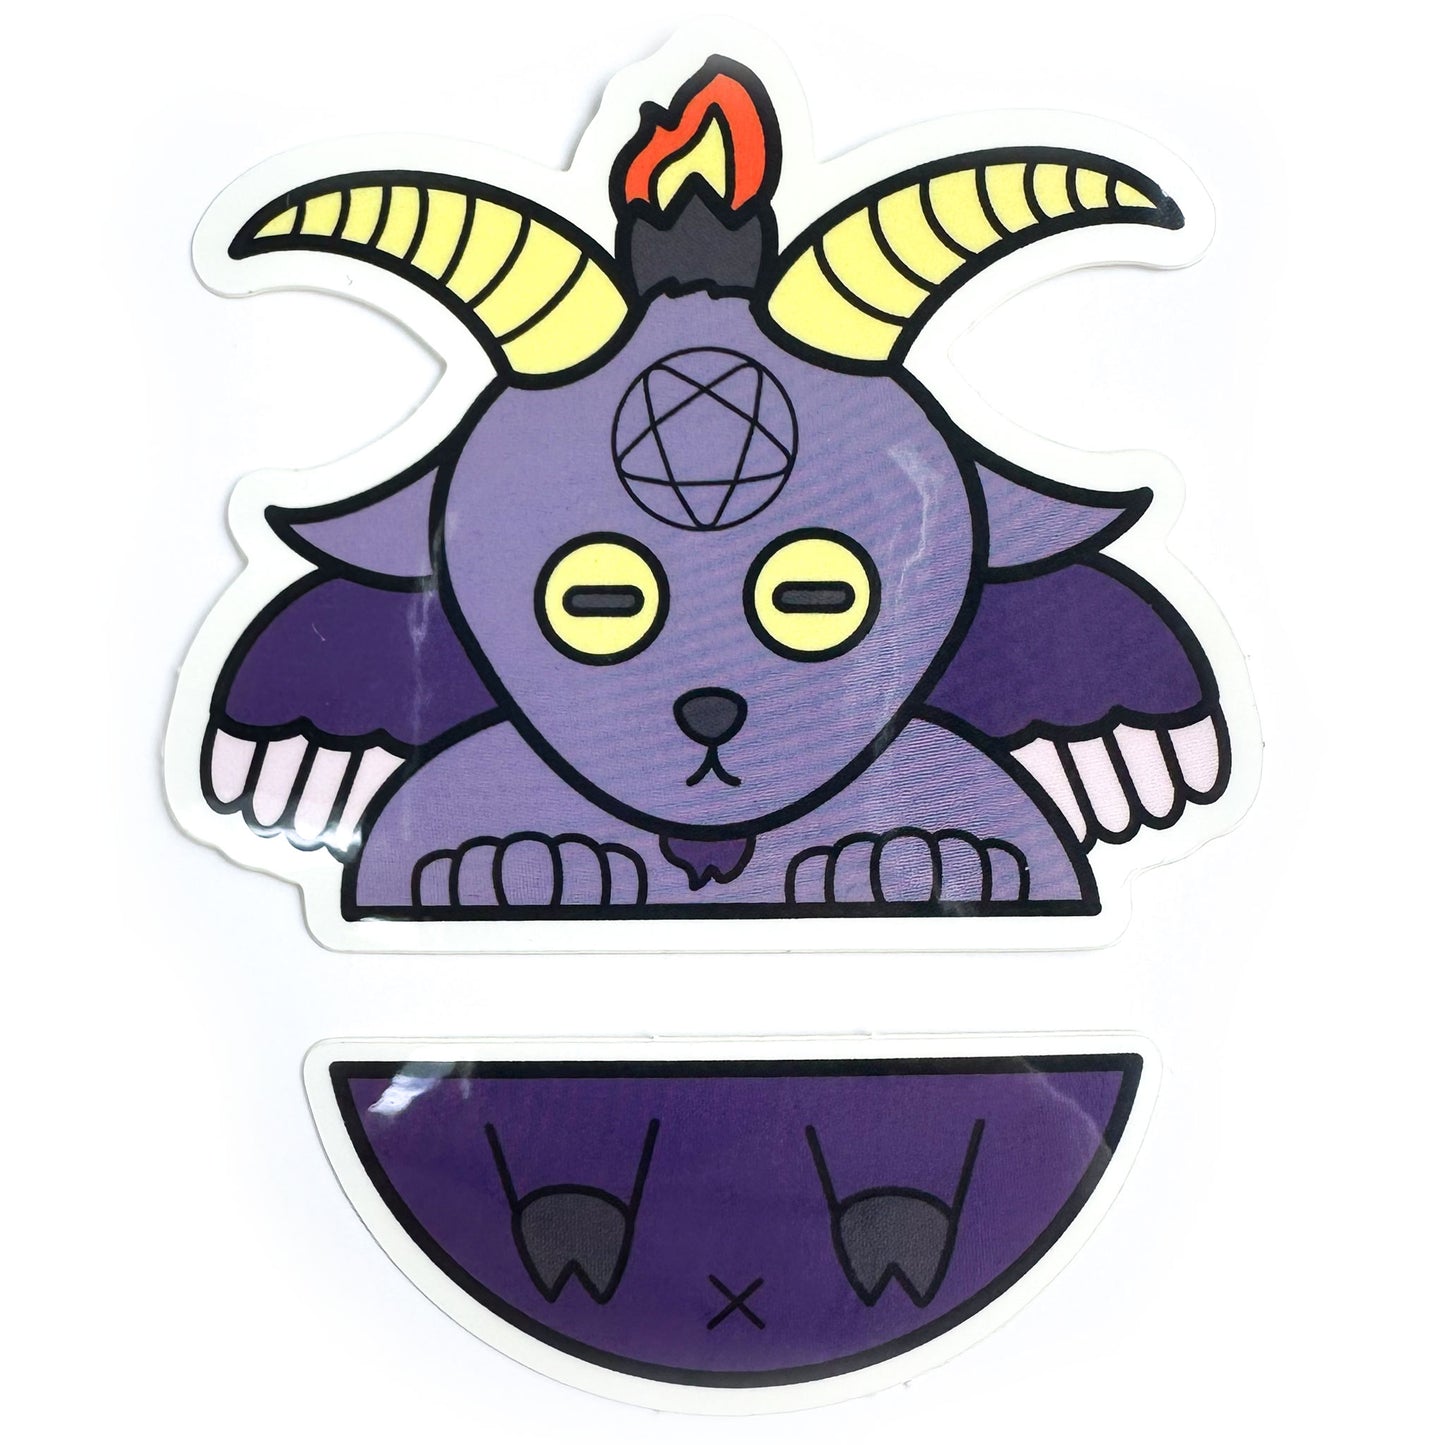 Two stickers in a set that come together to form Baphomet that looks like he has been cut in half horizontally across the middle. The top half is his goat head with wings and the bottom half is his little goat legs and butt. 